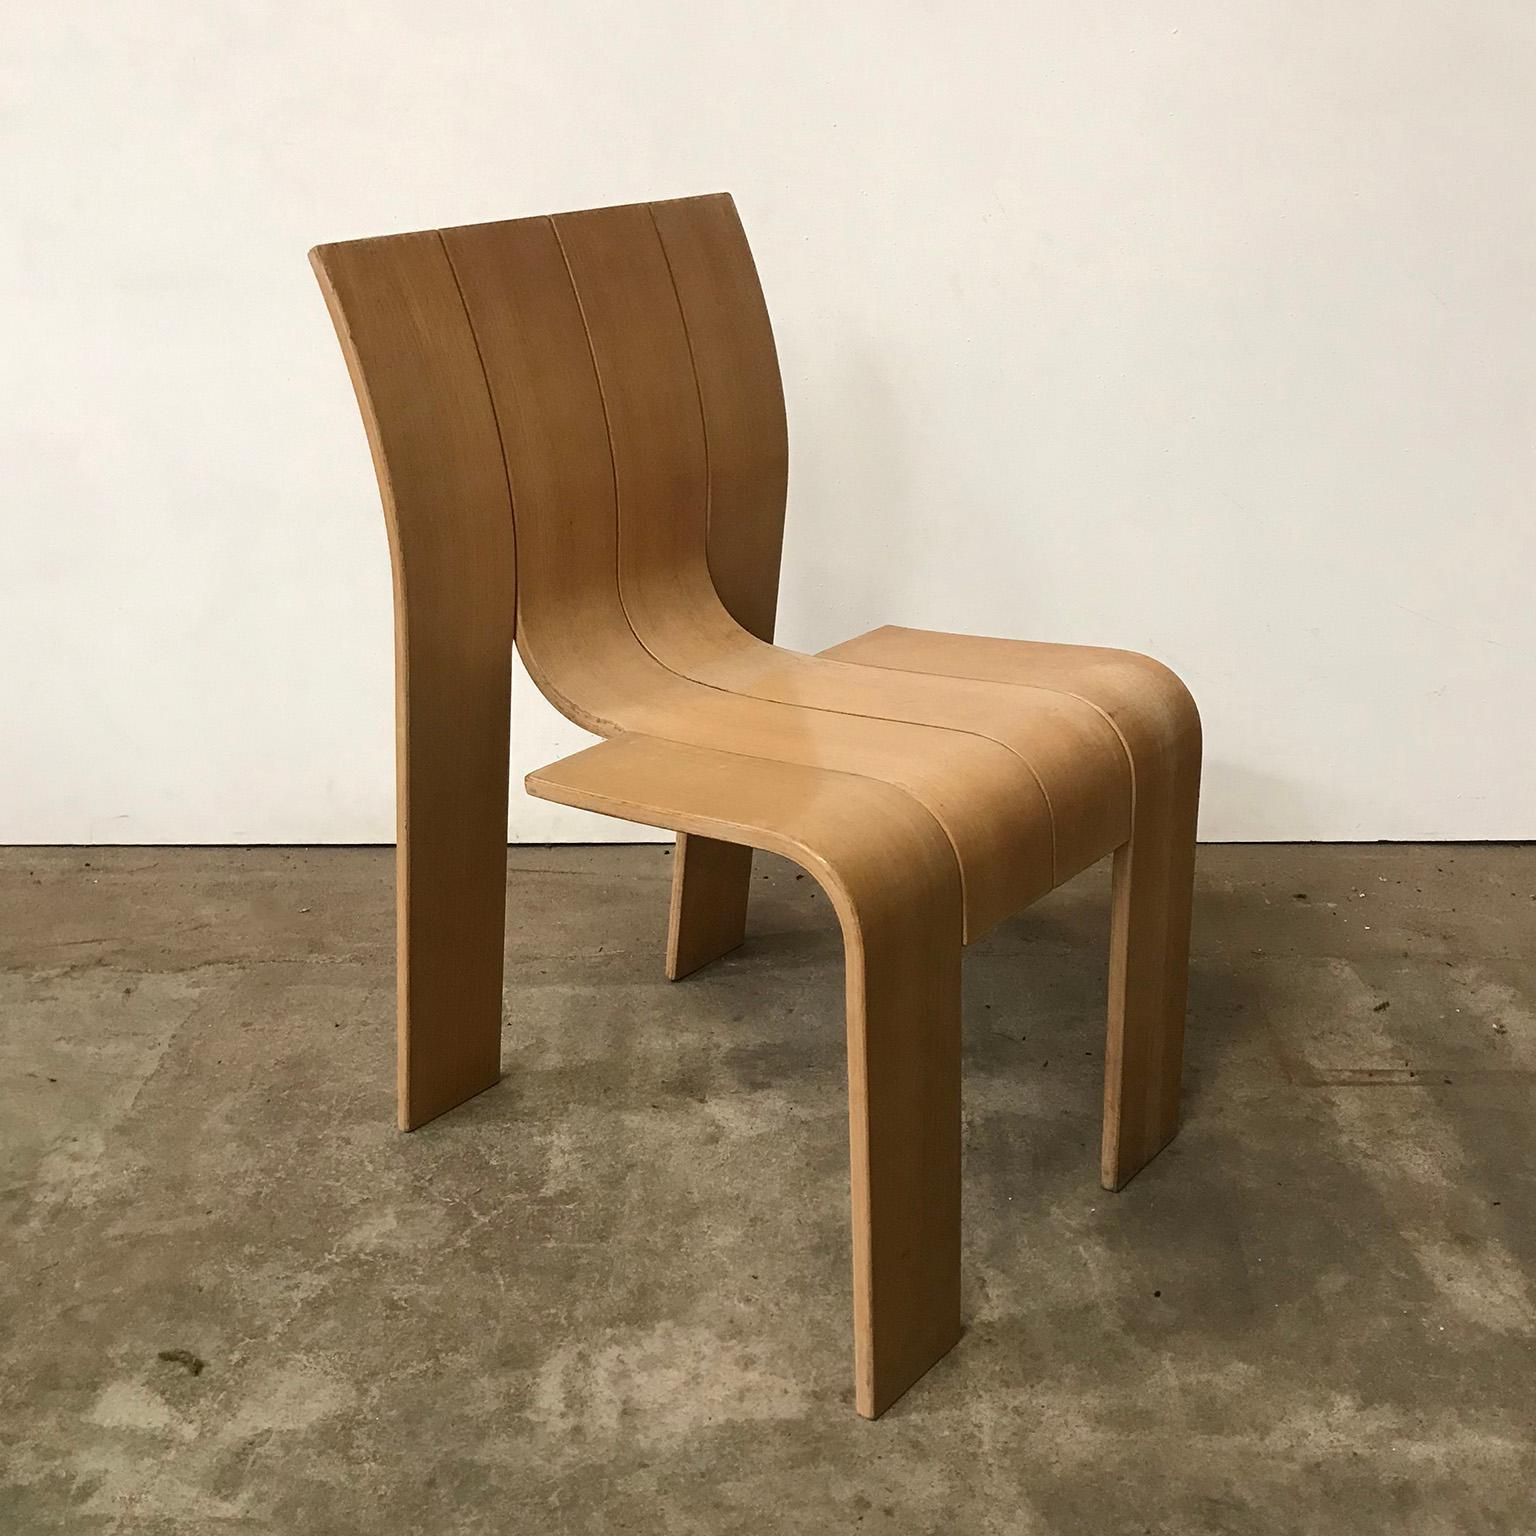 Dutch designed, chair of bended wood. The chair has no frame. The chairs have a 